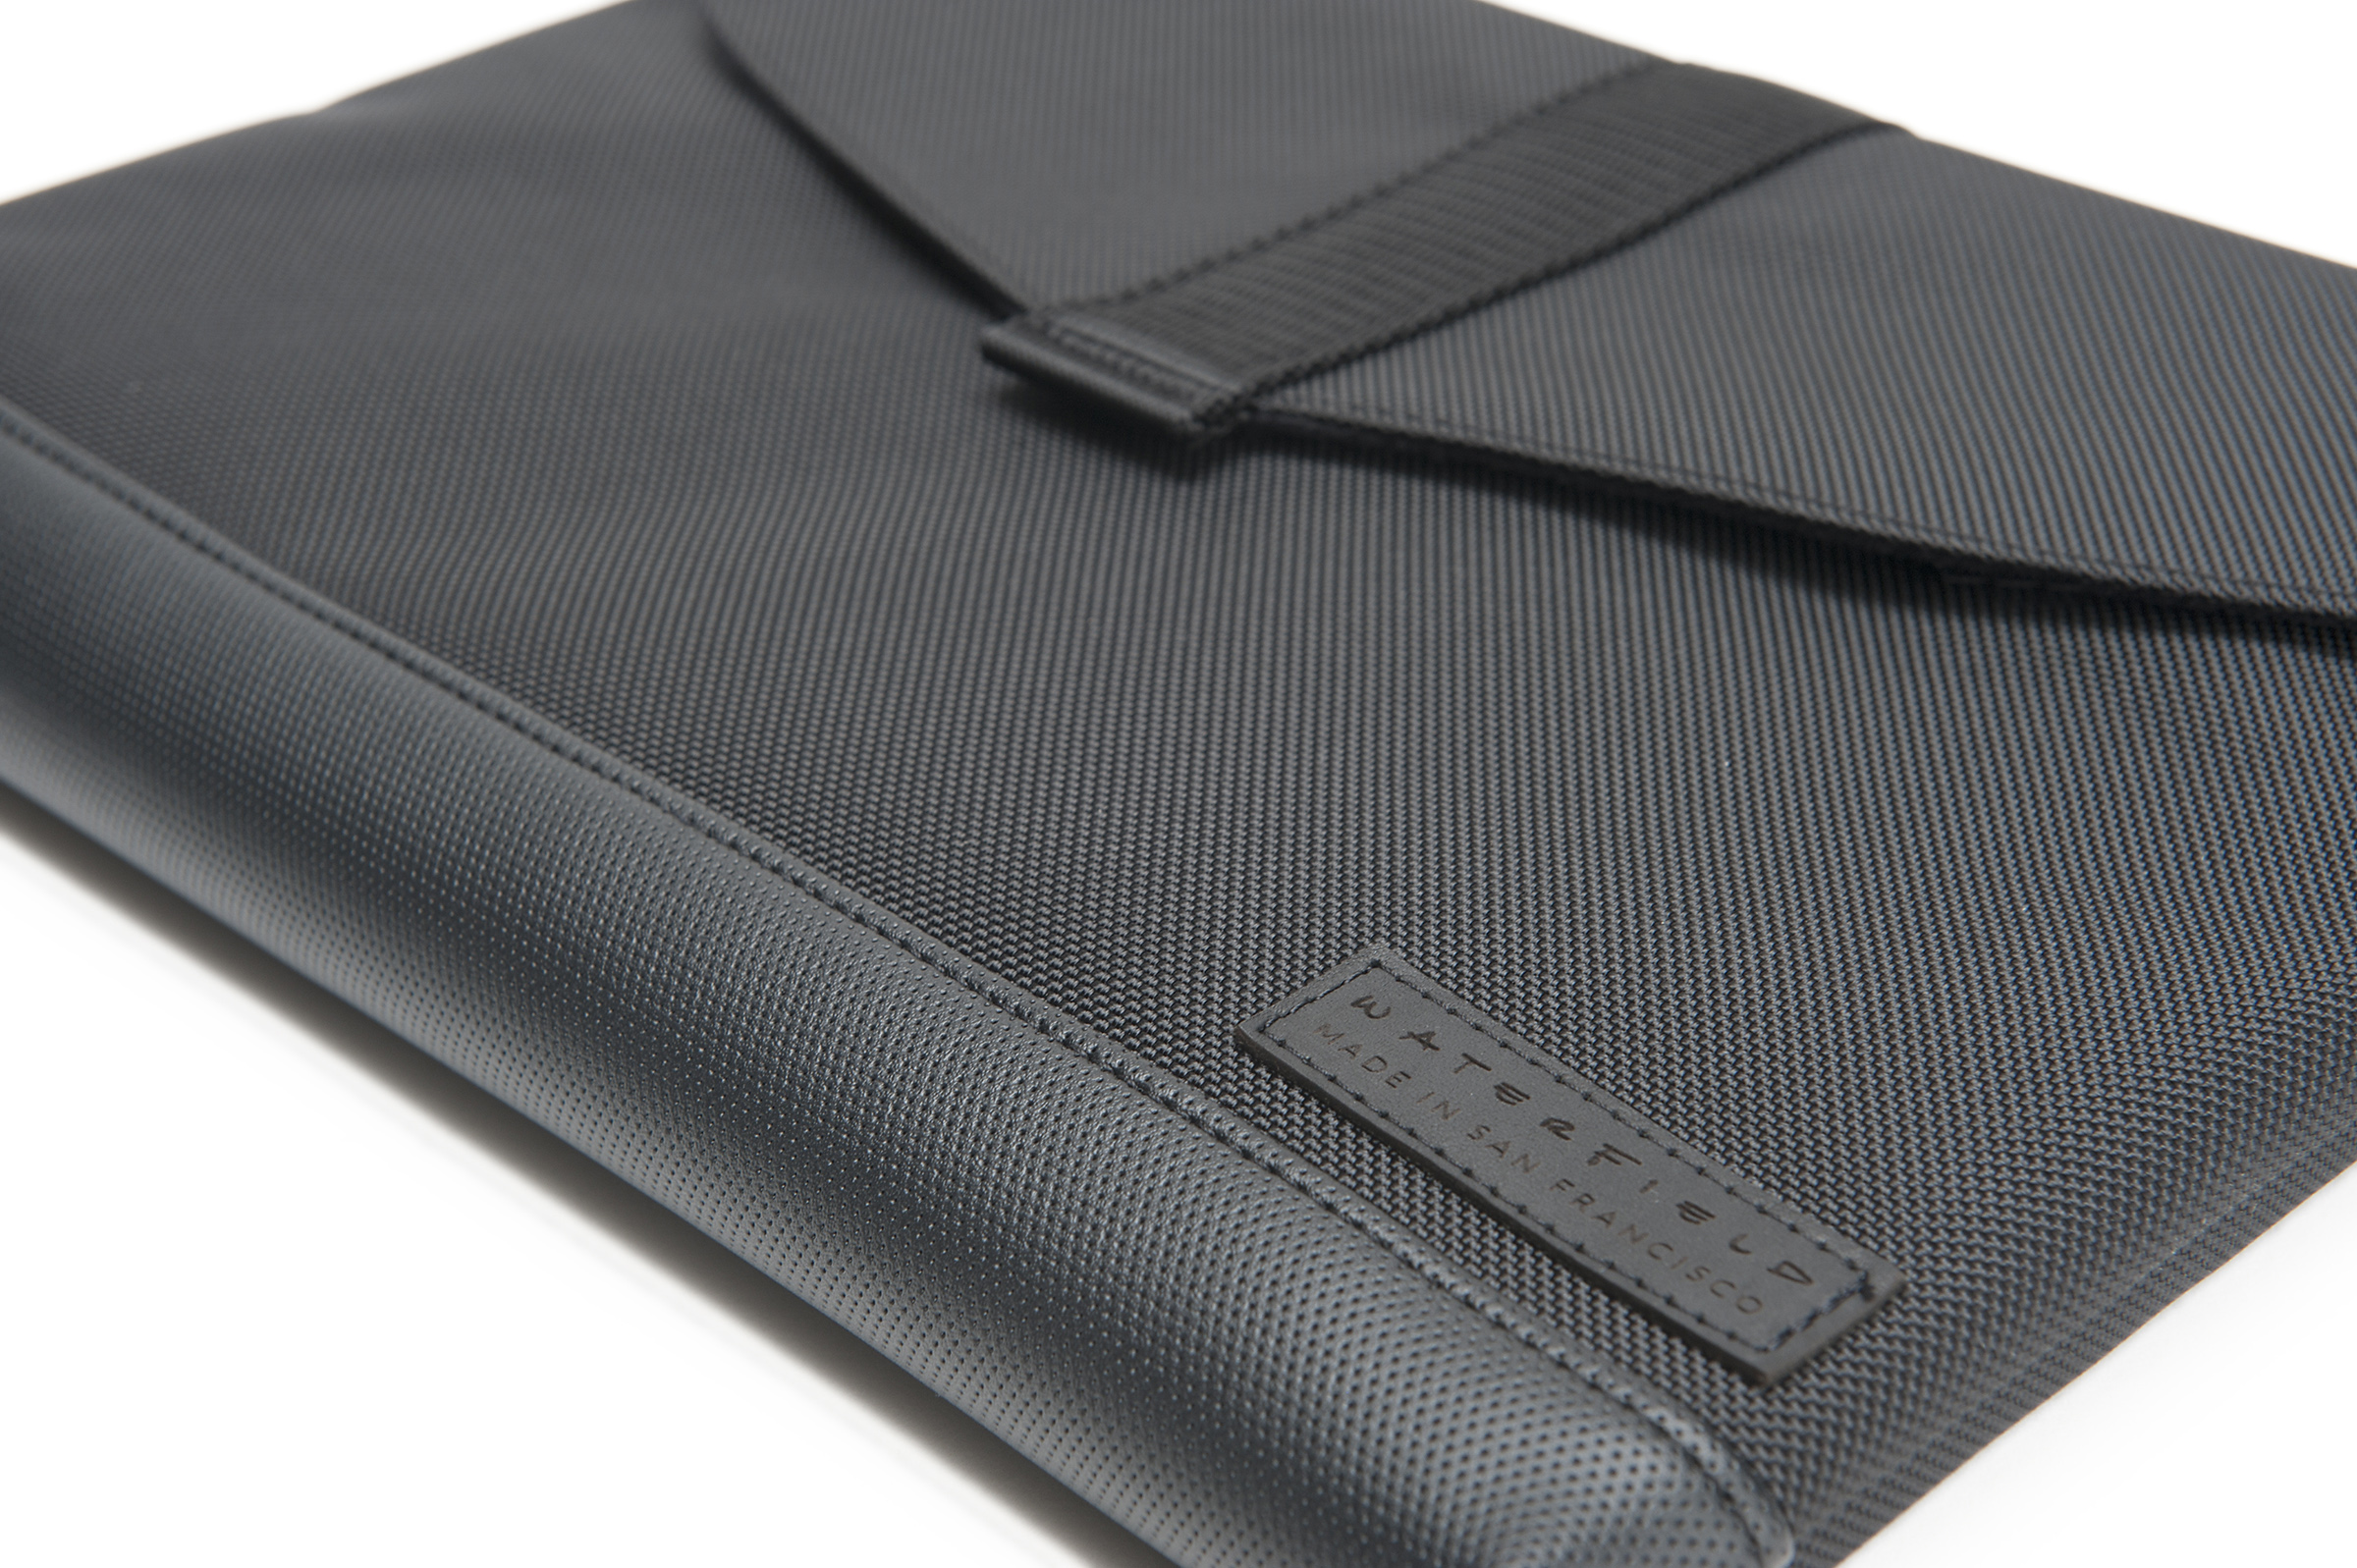 Surface Pro 4 or Surface Book SleeveCase